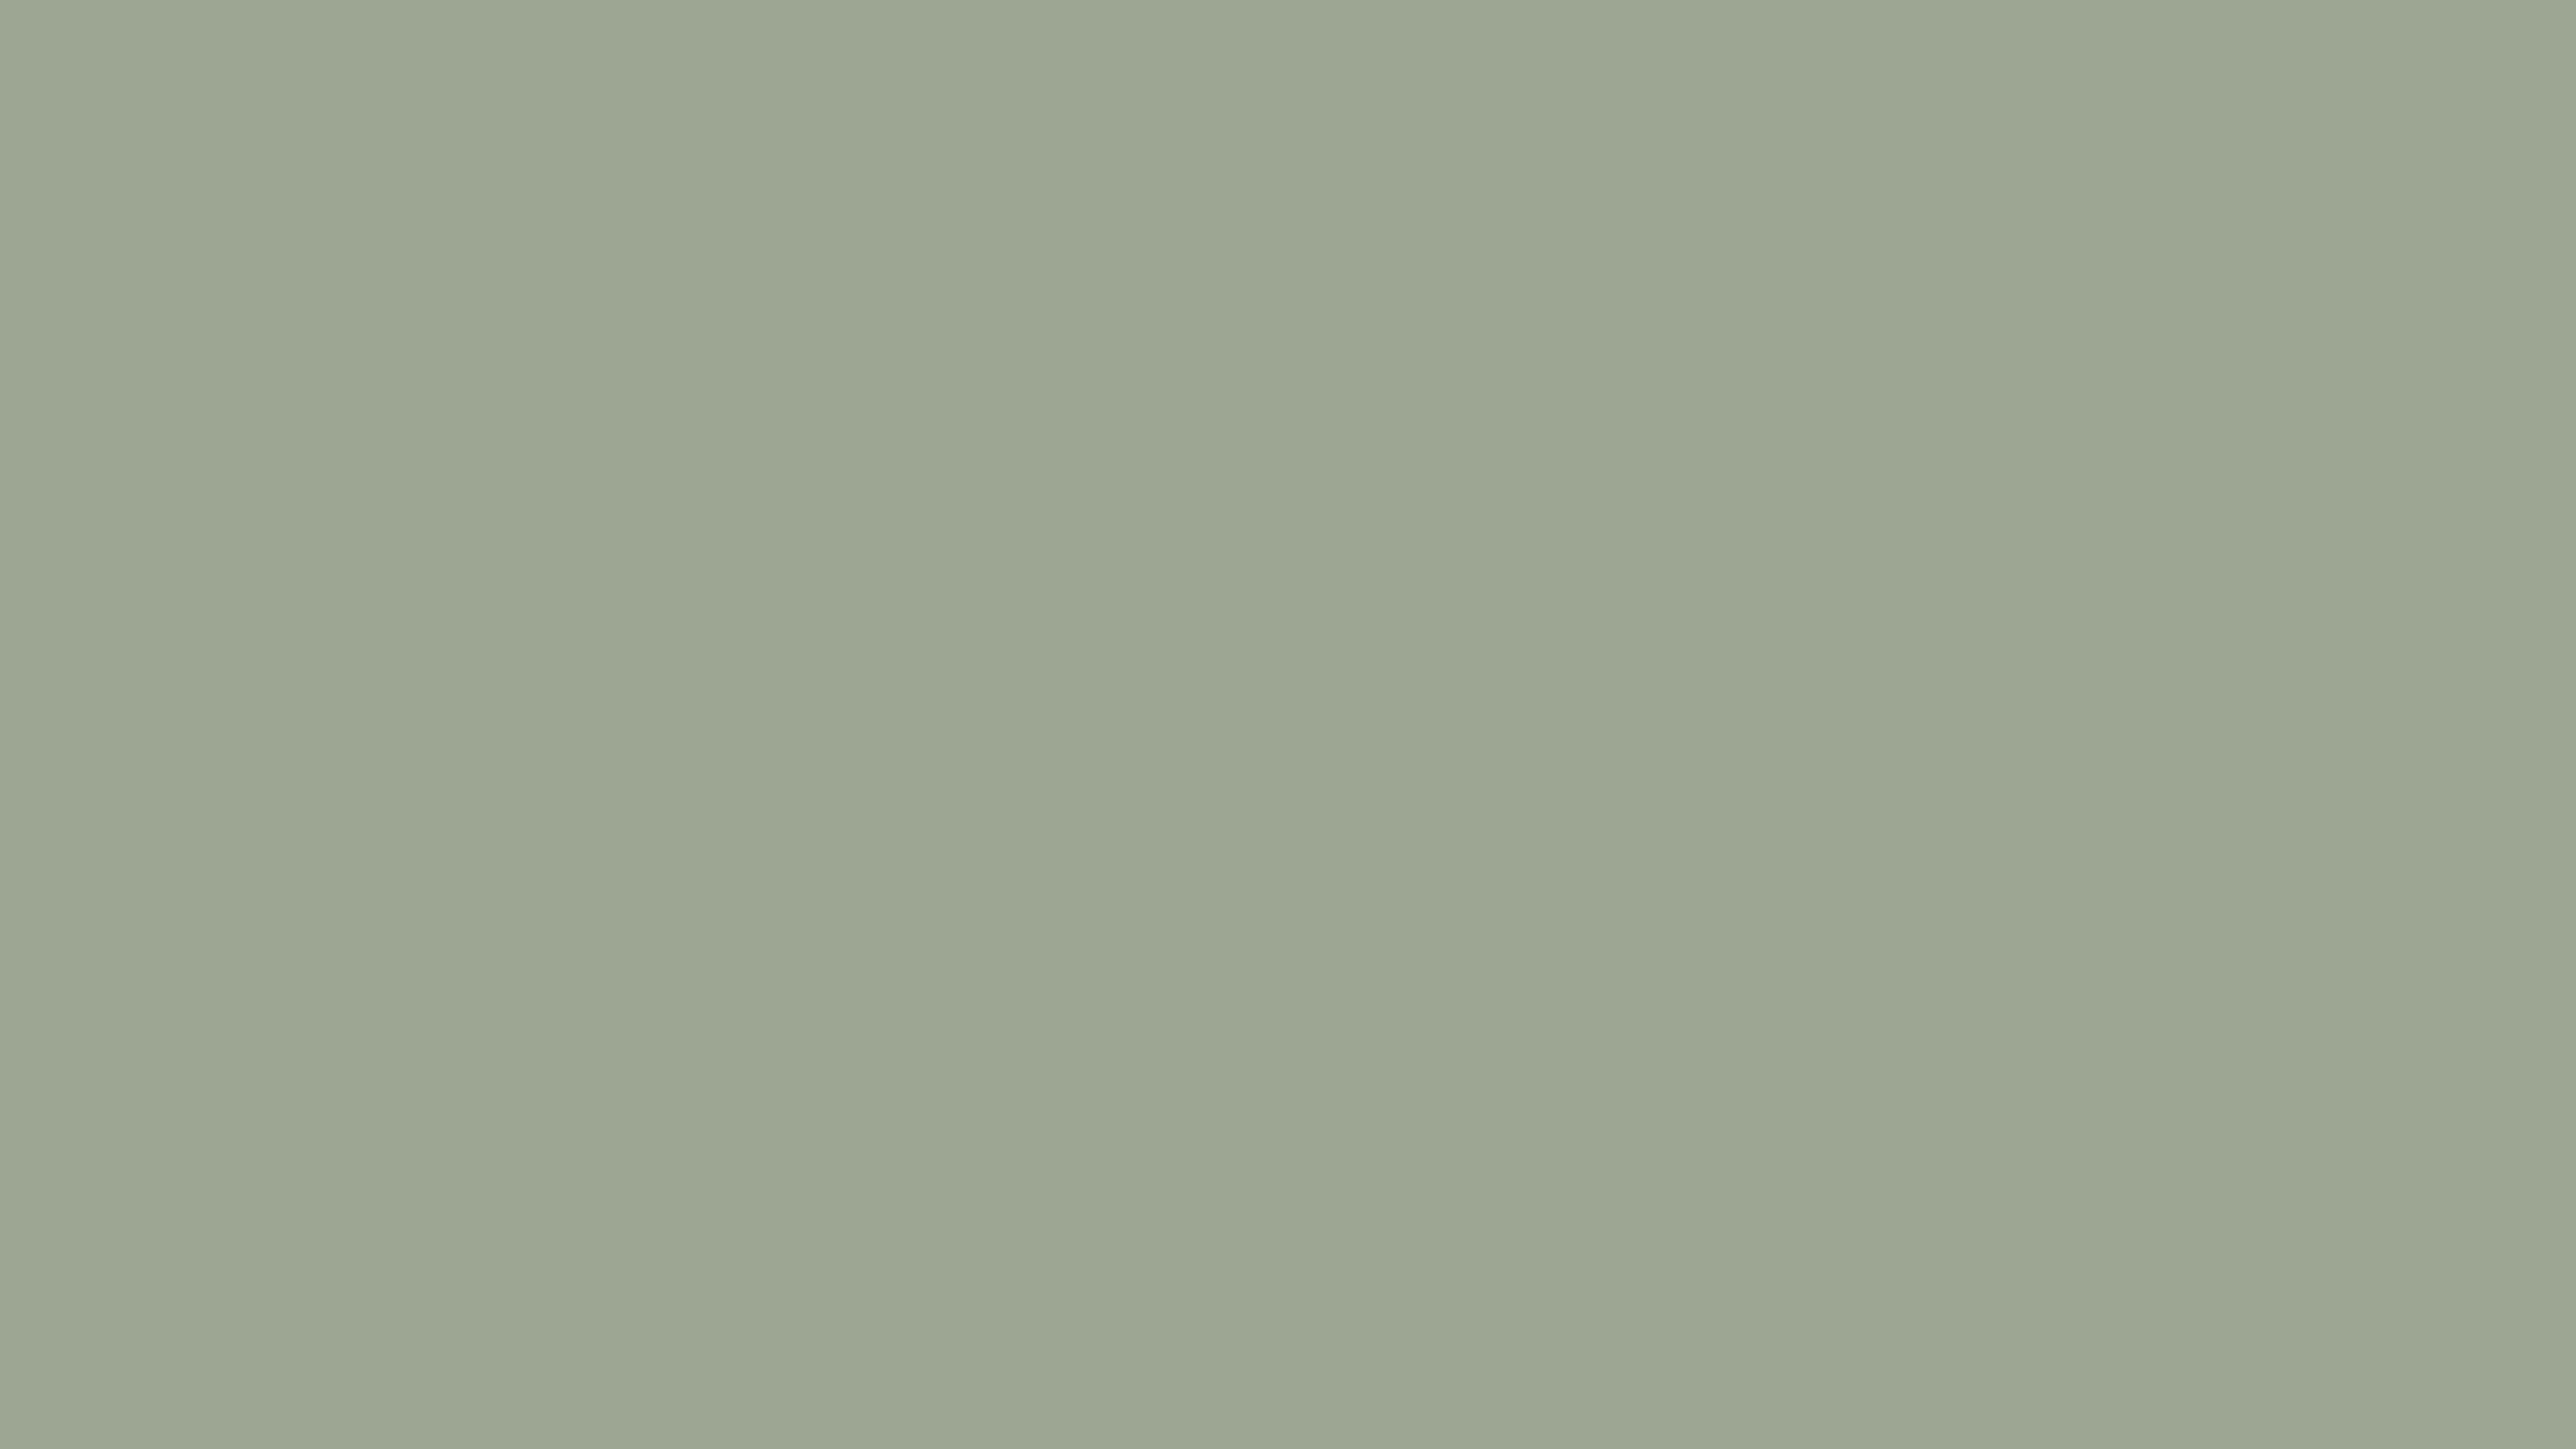 https://www.icolorpalette.com/download/solidcolorimage/9da693_solid_color_background_icolorpalette.png